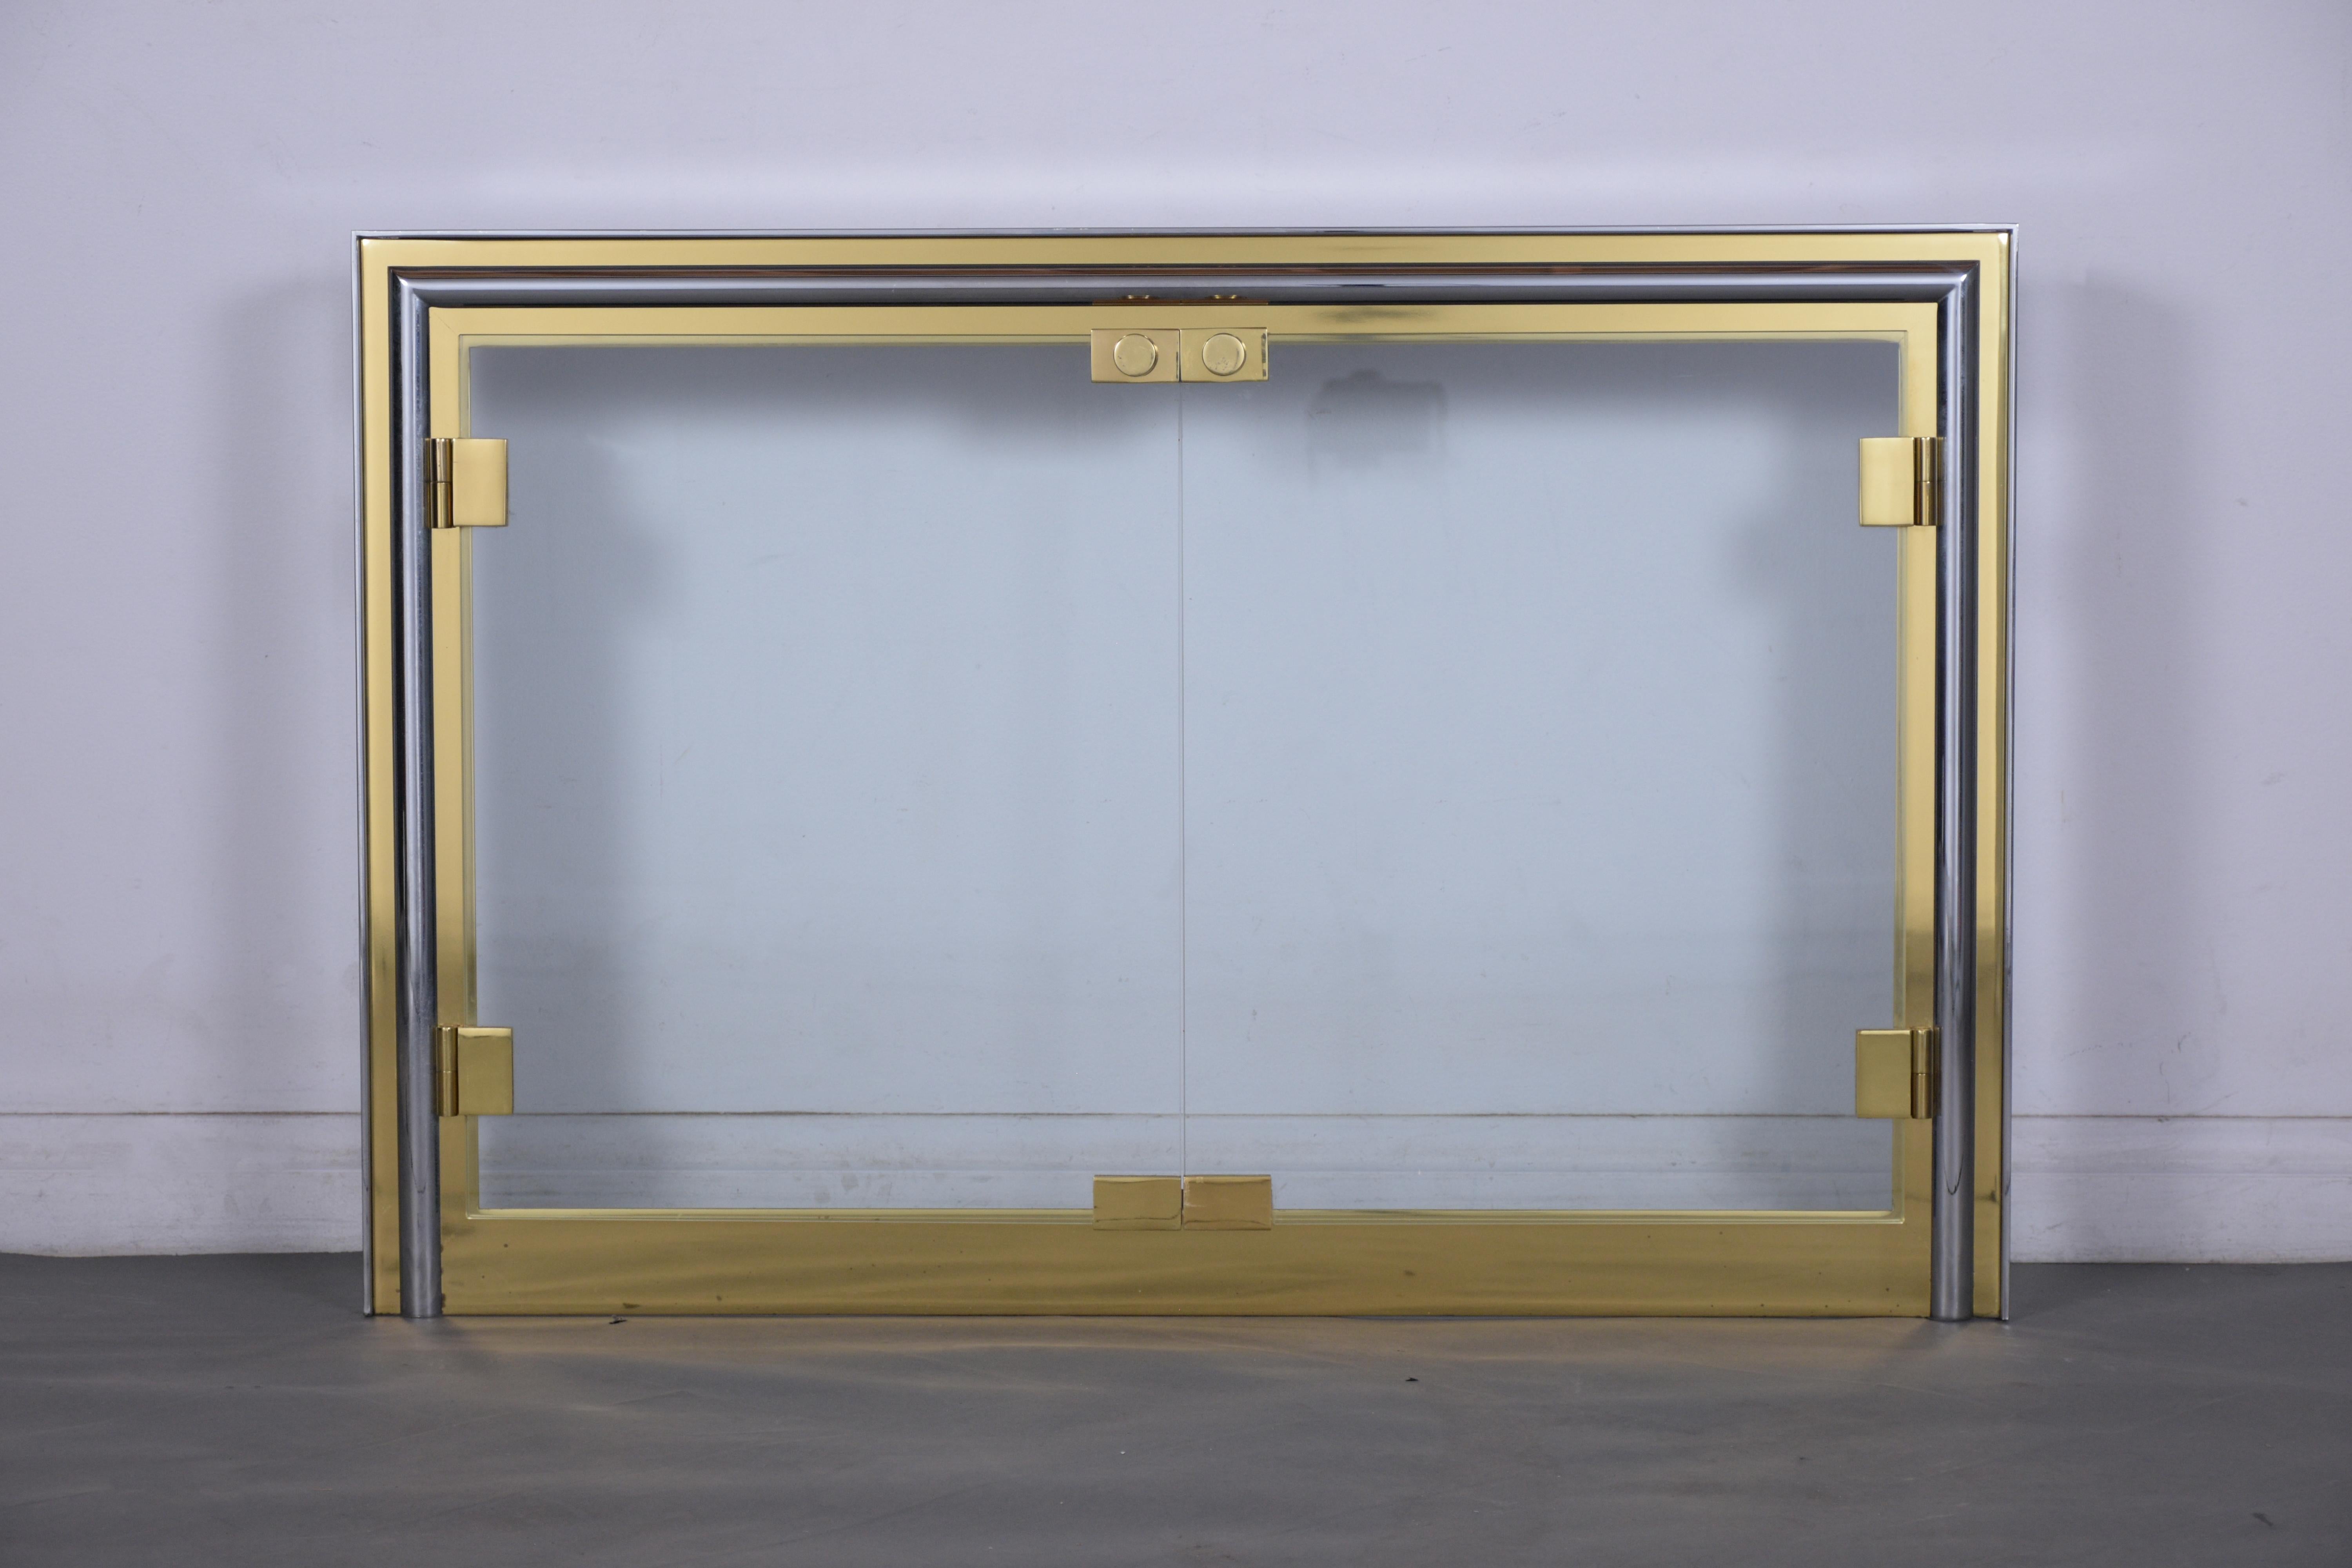 An extraordinary mid-century modern fireplace ornament hand-crafted out of brass and steel combination. This piece features a brass and chrome combination, with two-clear glass doors held by brass bracket hinges. This elegant modern glass screen is